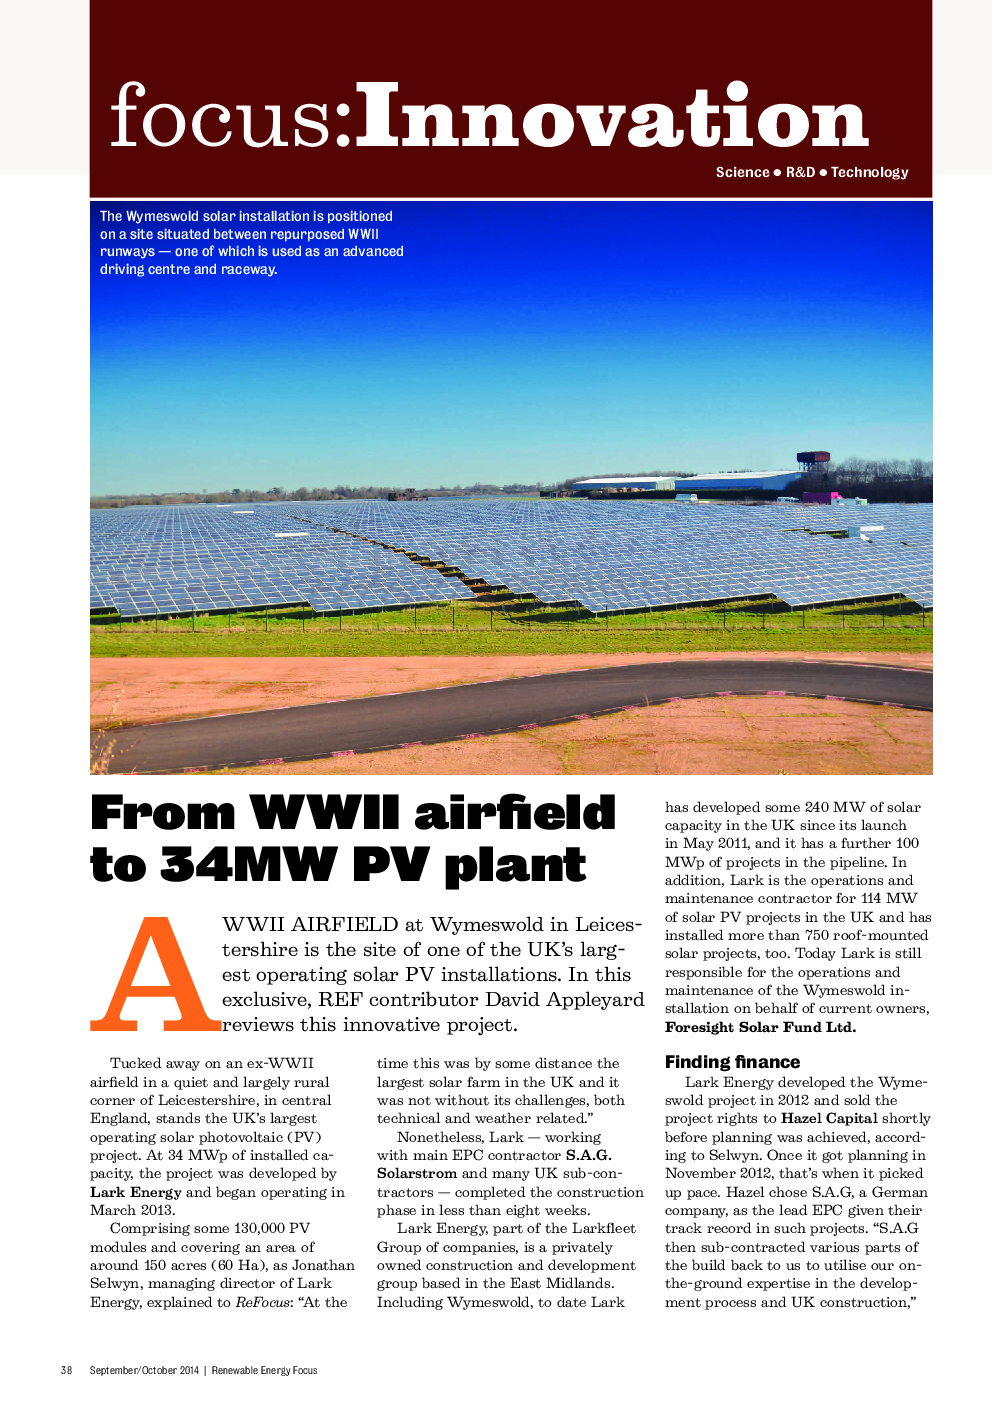 From WWII airfield to 34MW PV plant